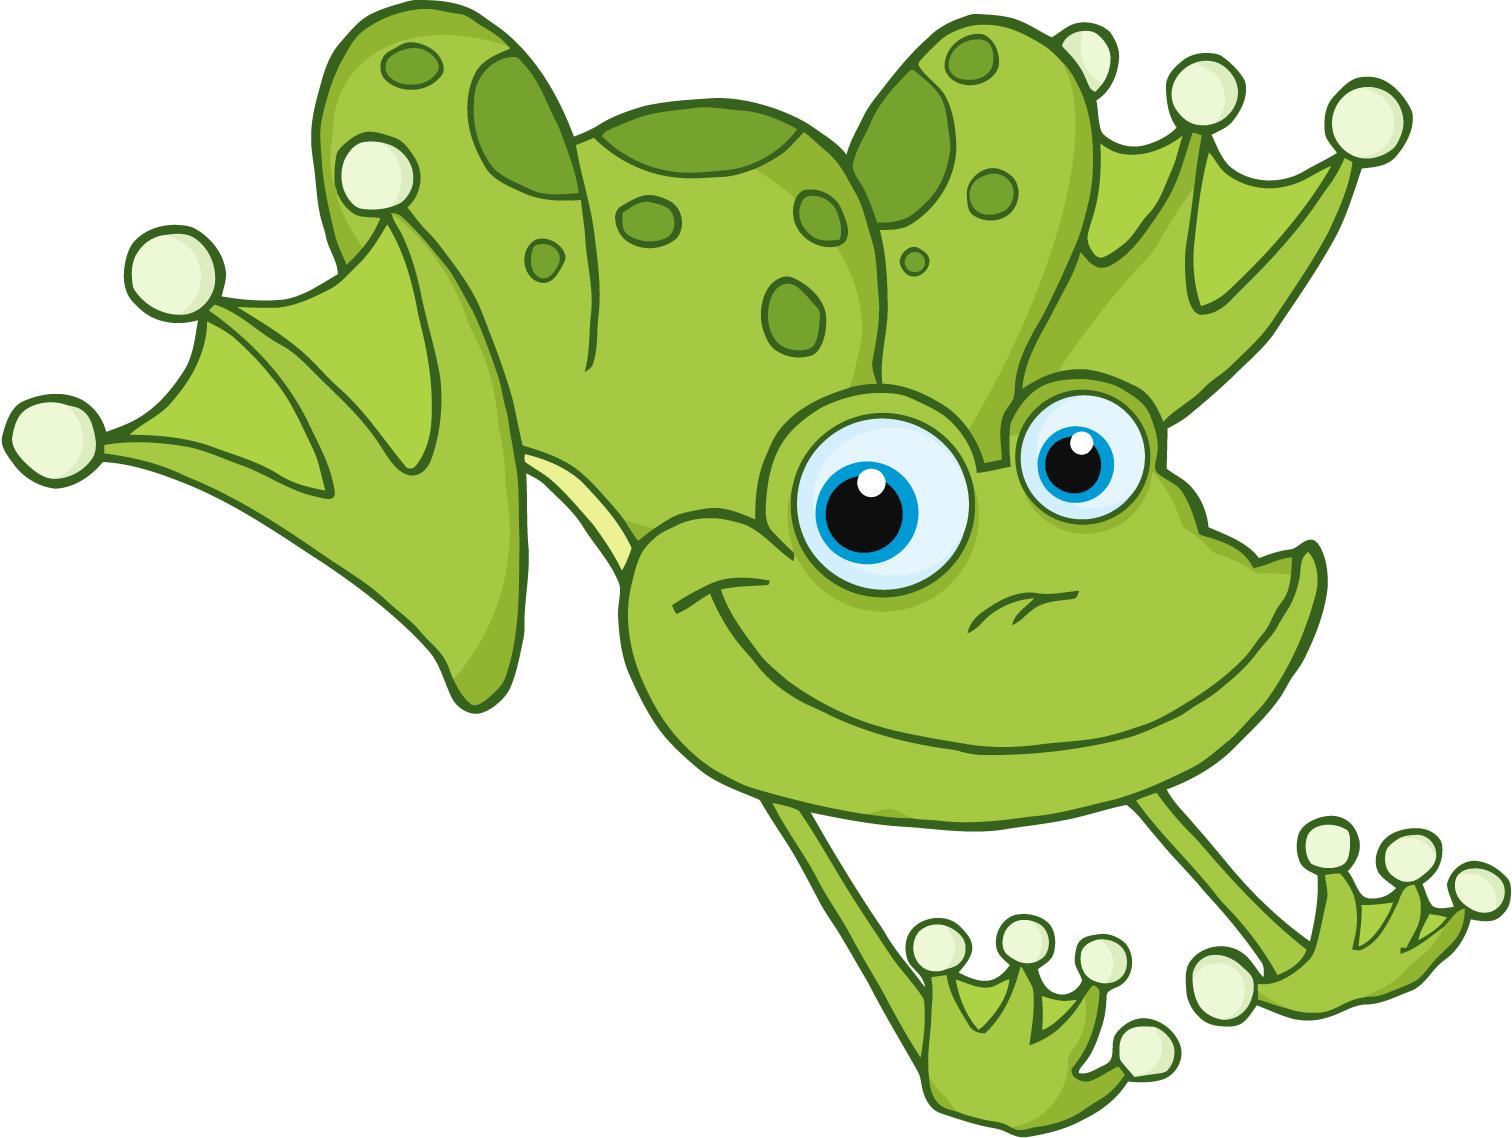 Cartoon Frog Images - Clipart library